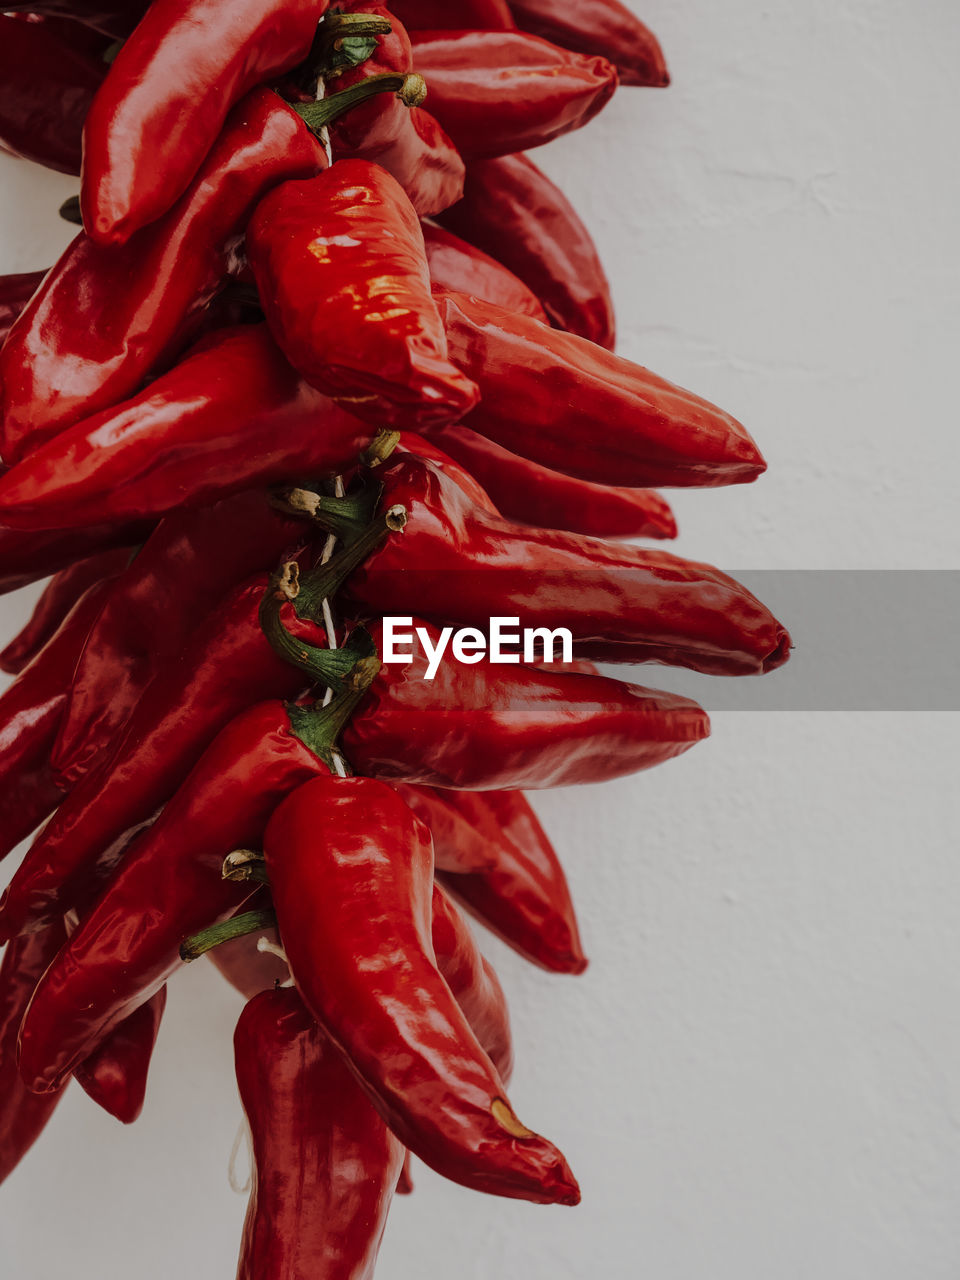 red, food, plant, pepper, chili pepper, food and drink, red chili pepper, produce, vegetable, spice, freshness, flower, no people, ingredient, bell peppers and chili peppers, studio shot, pepper - vegetable, close-up, indoors, wellbeing, still life, healthy eating